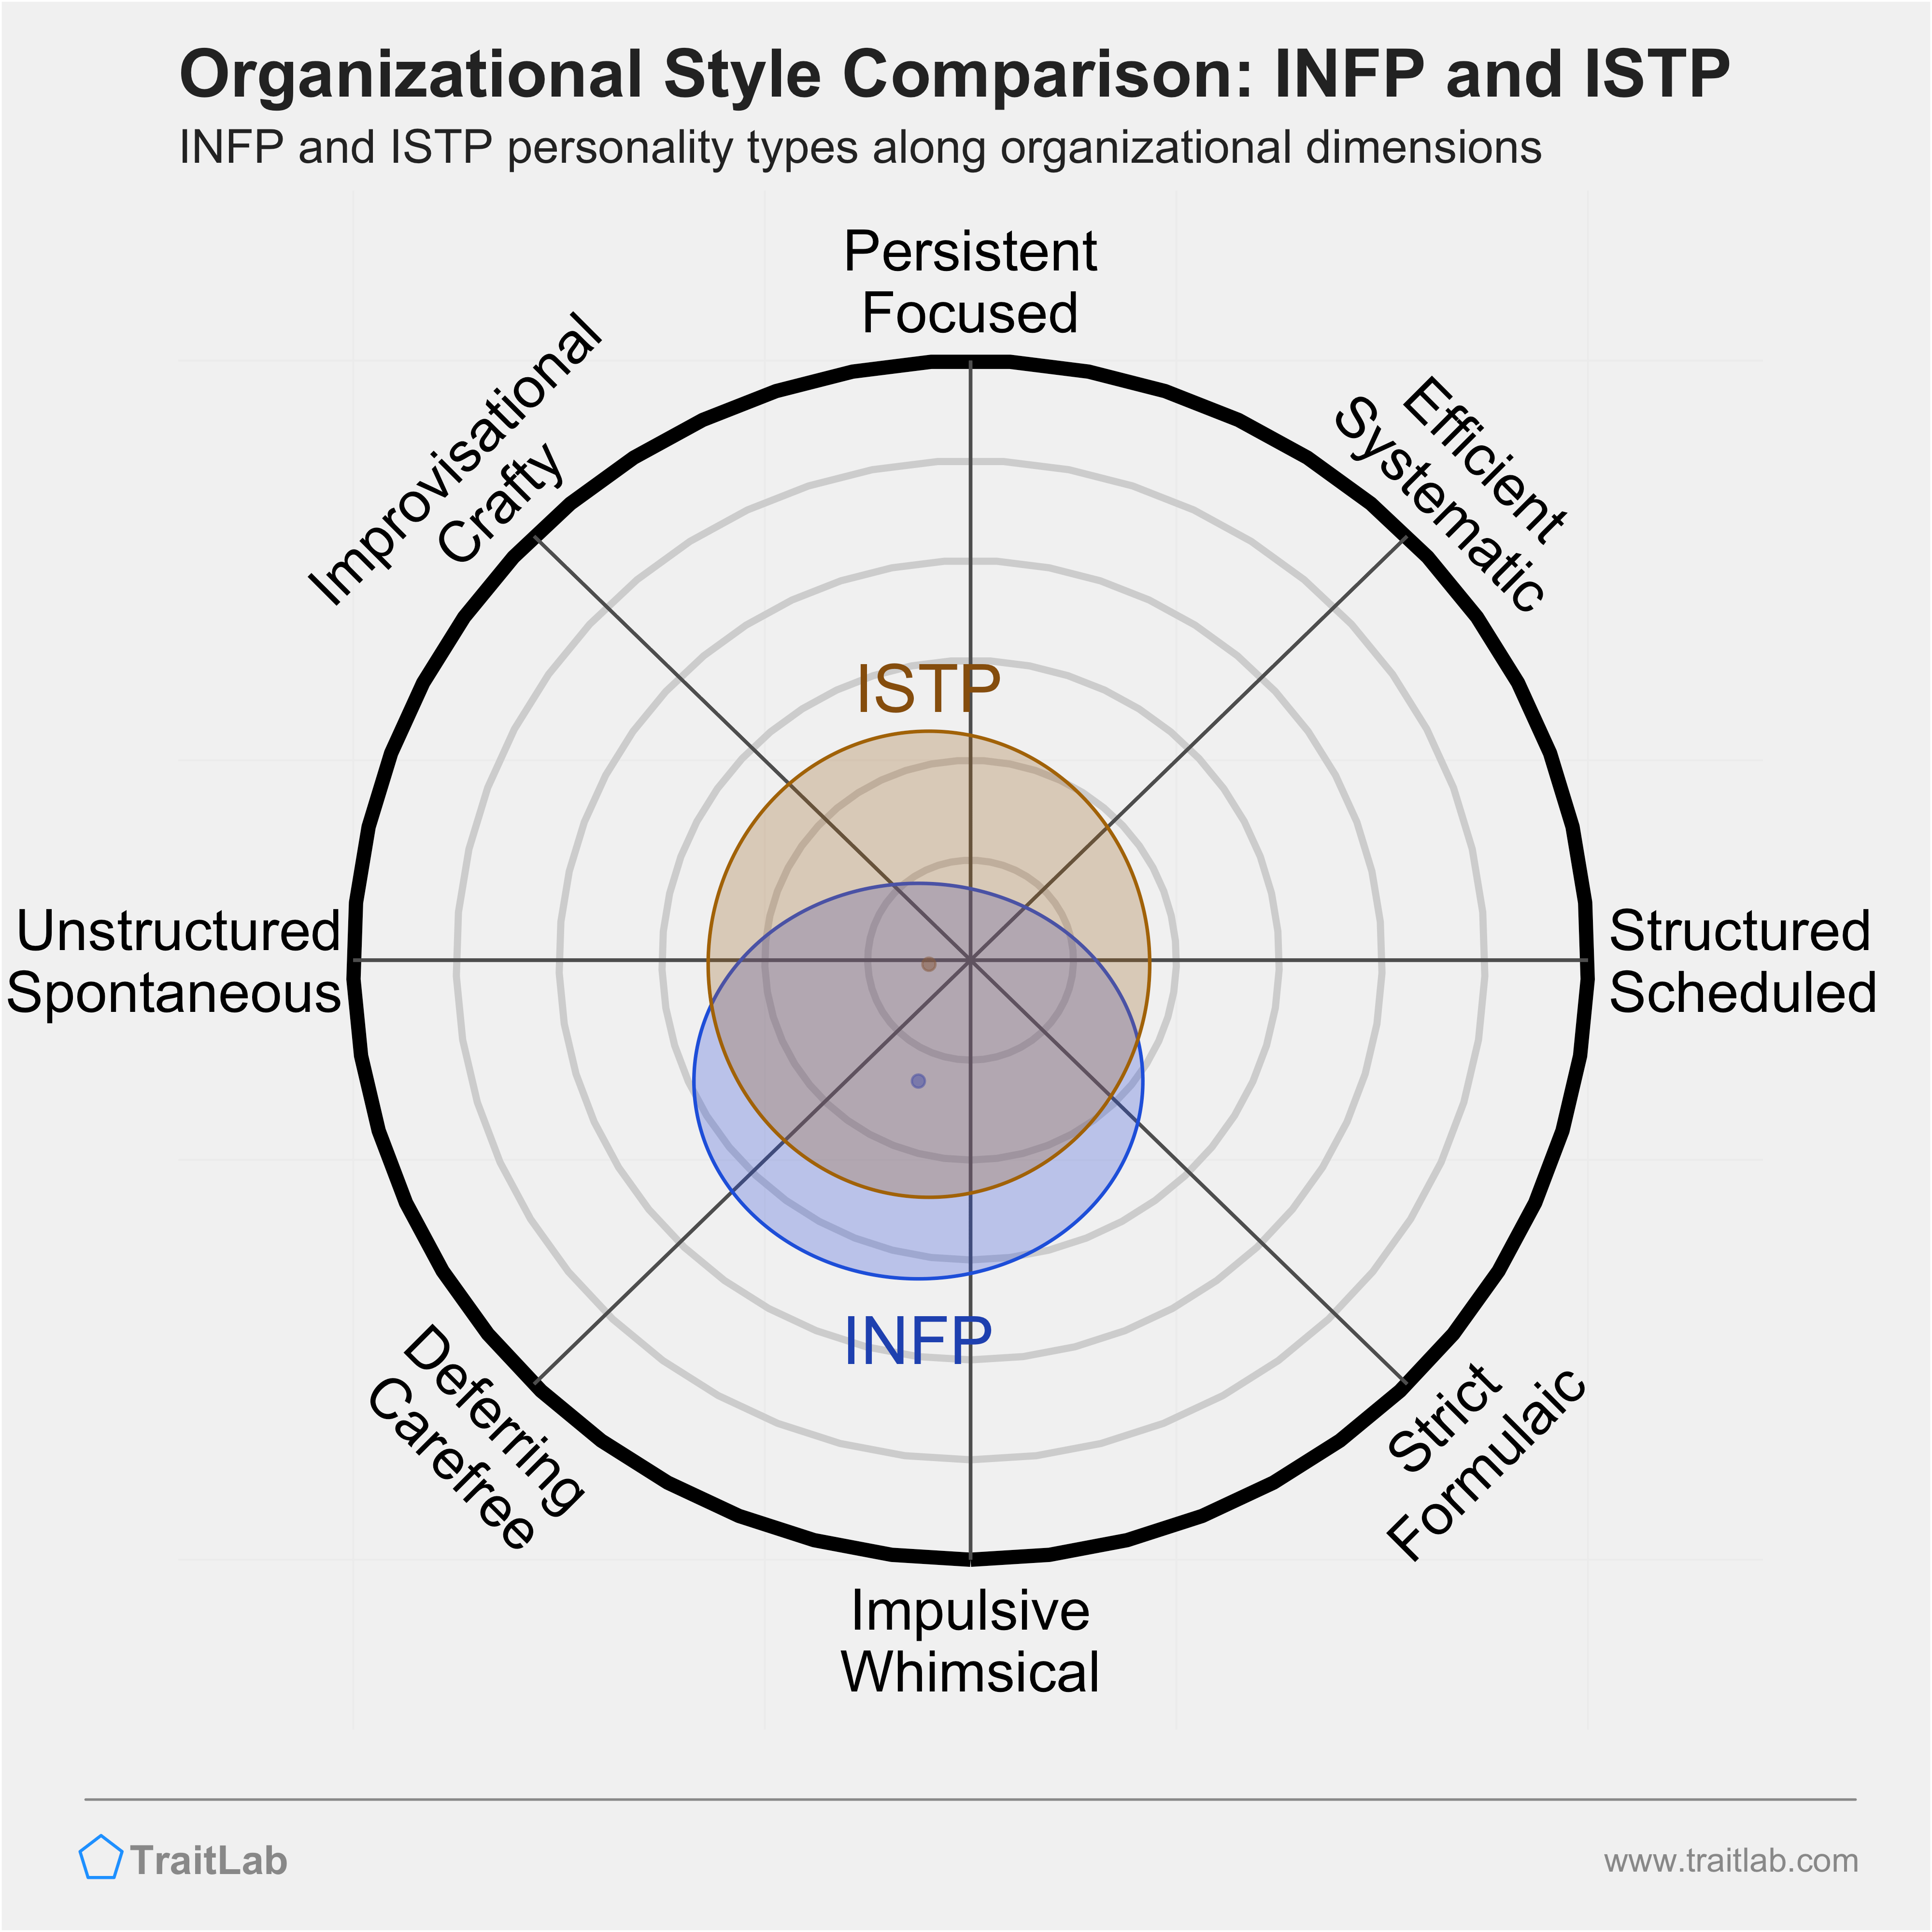 INFP and ISTP comparison across organizational dimensions